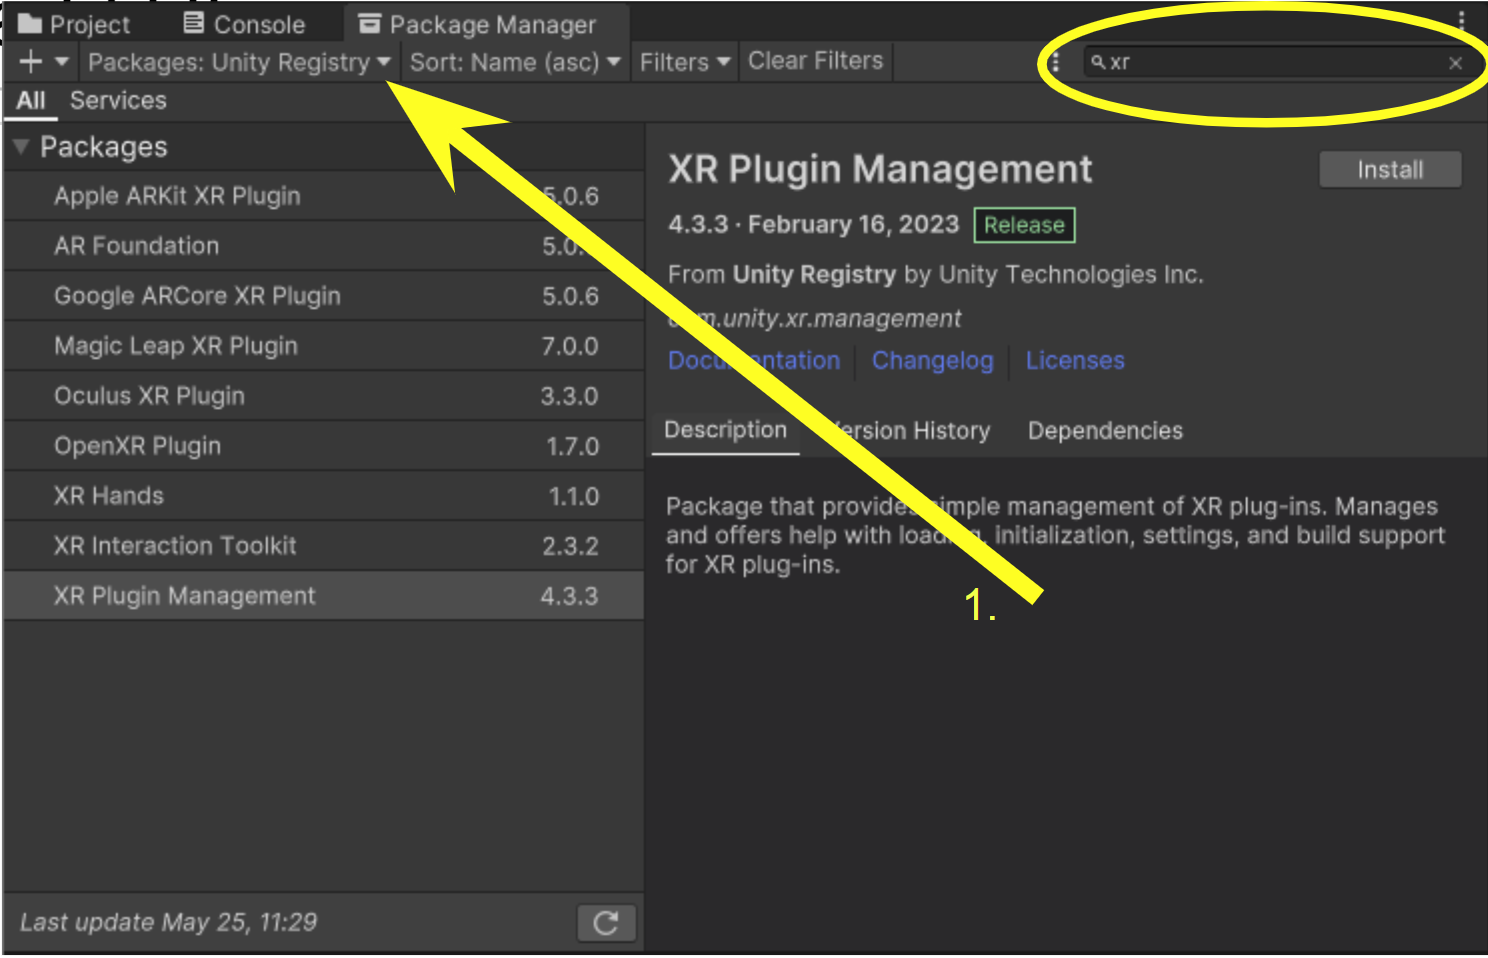 In the Package Manager window, click the Install button to install the XR Plug-in Management package.